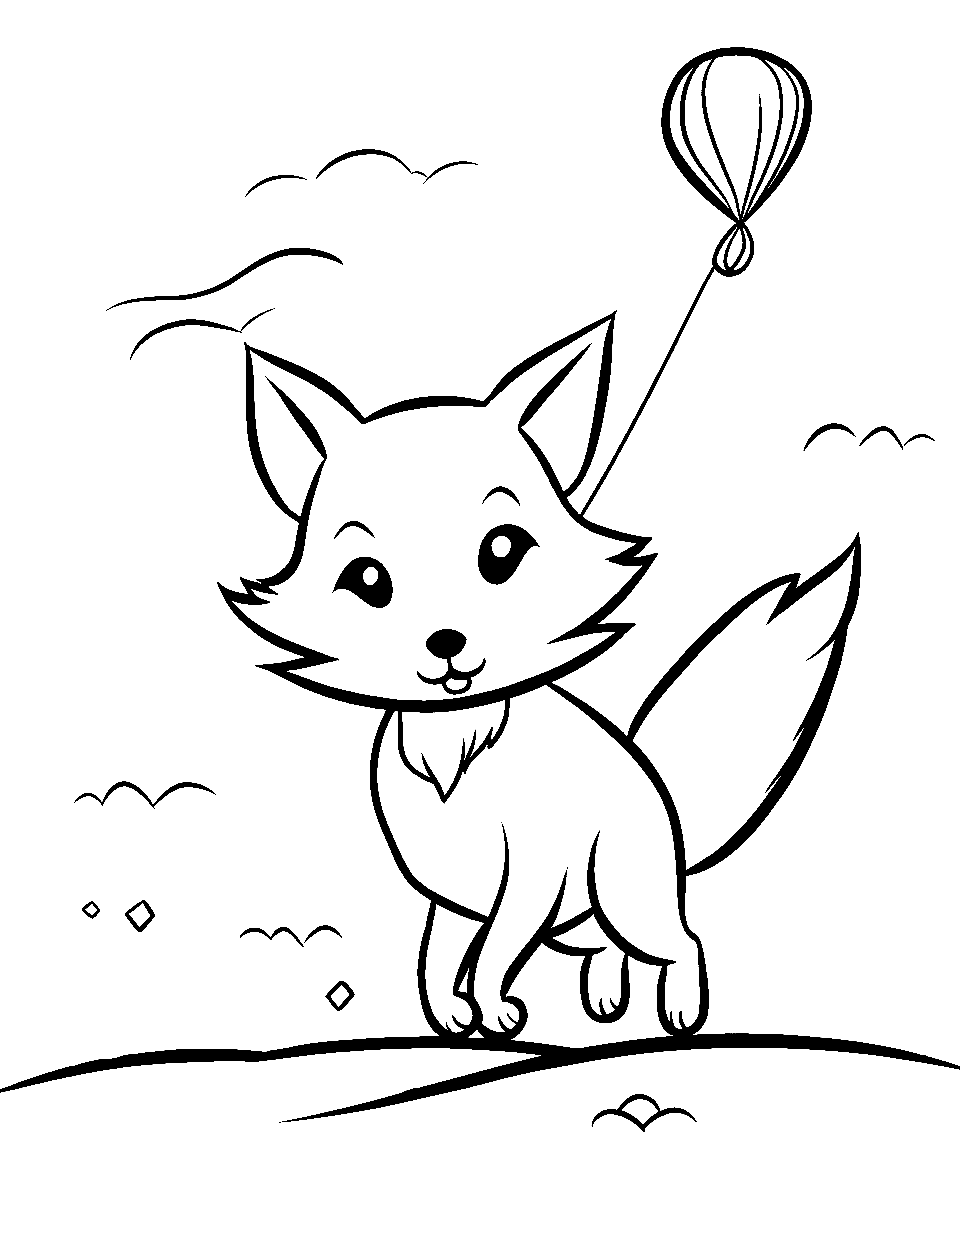 Fox's Balloon Flying Day Fox Coloring Page - A fox running with a Balloon trailing behind.